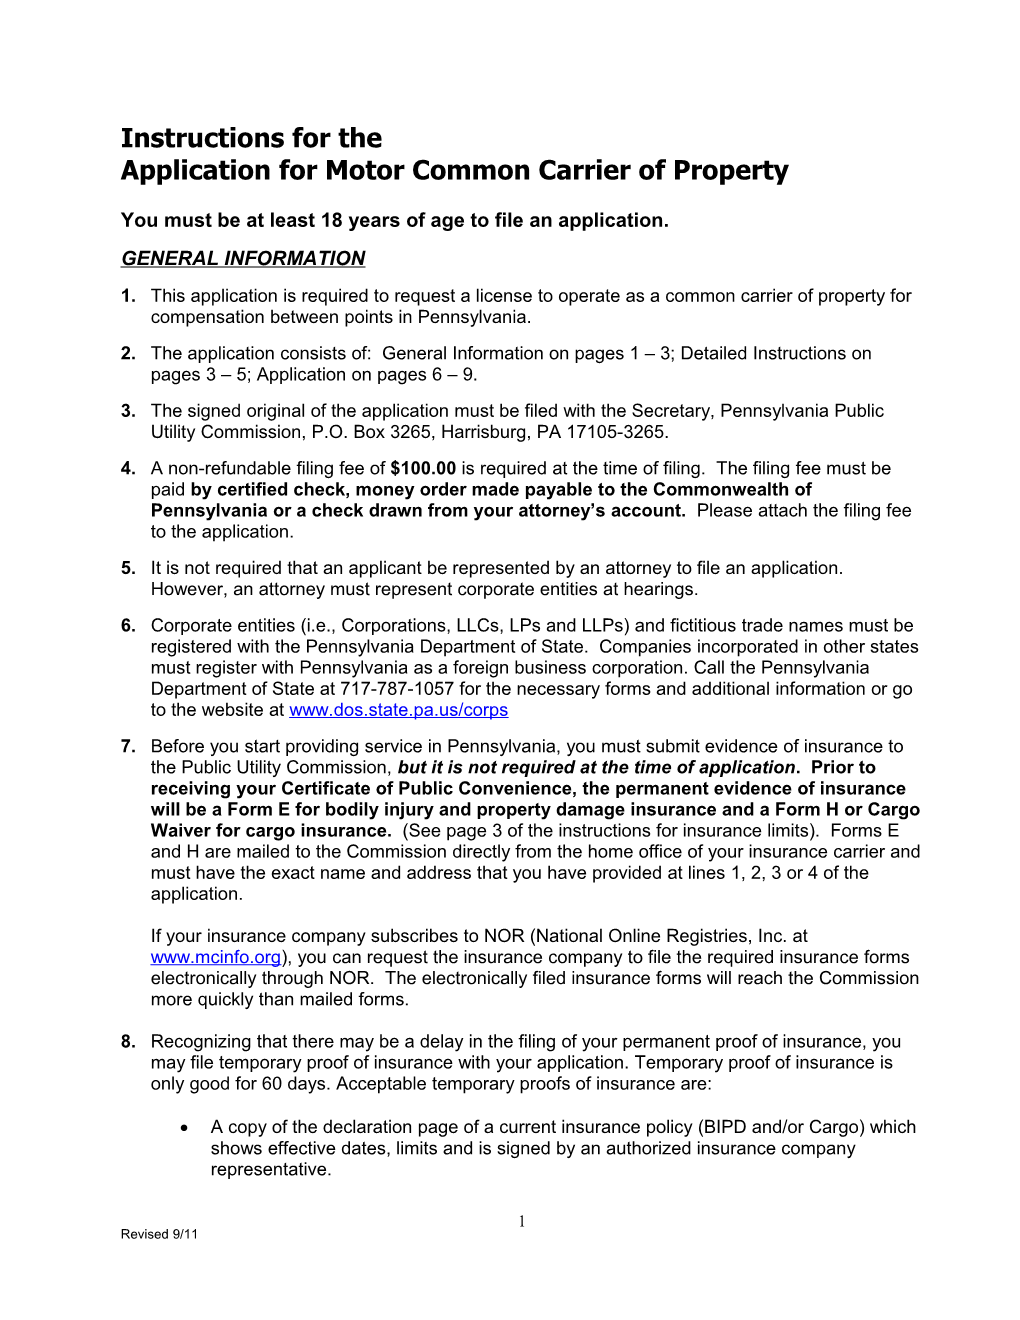 Application for Motor Common Carrier of Property